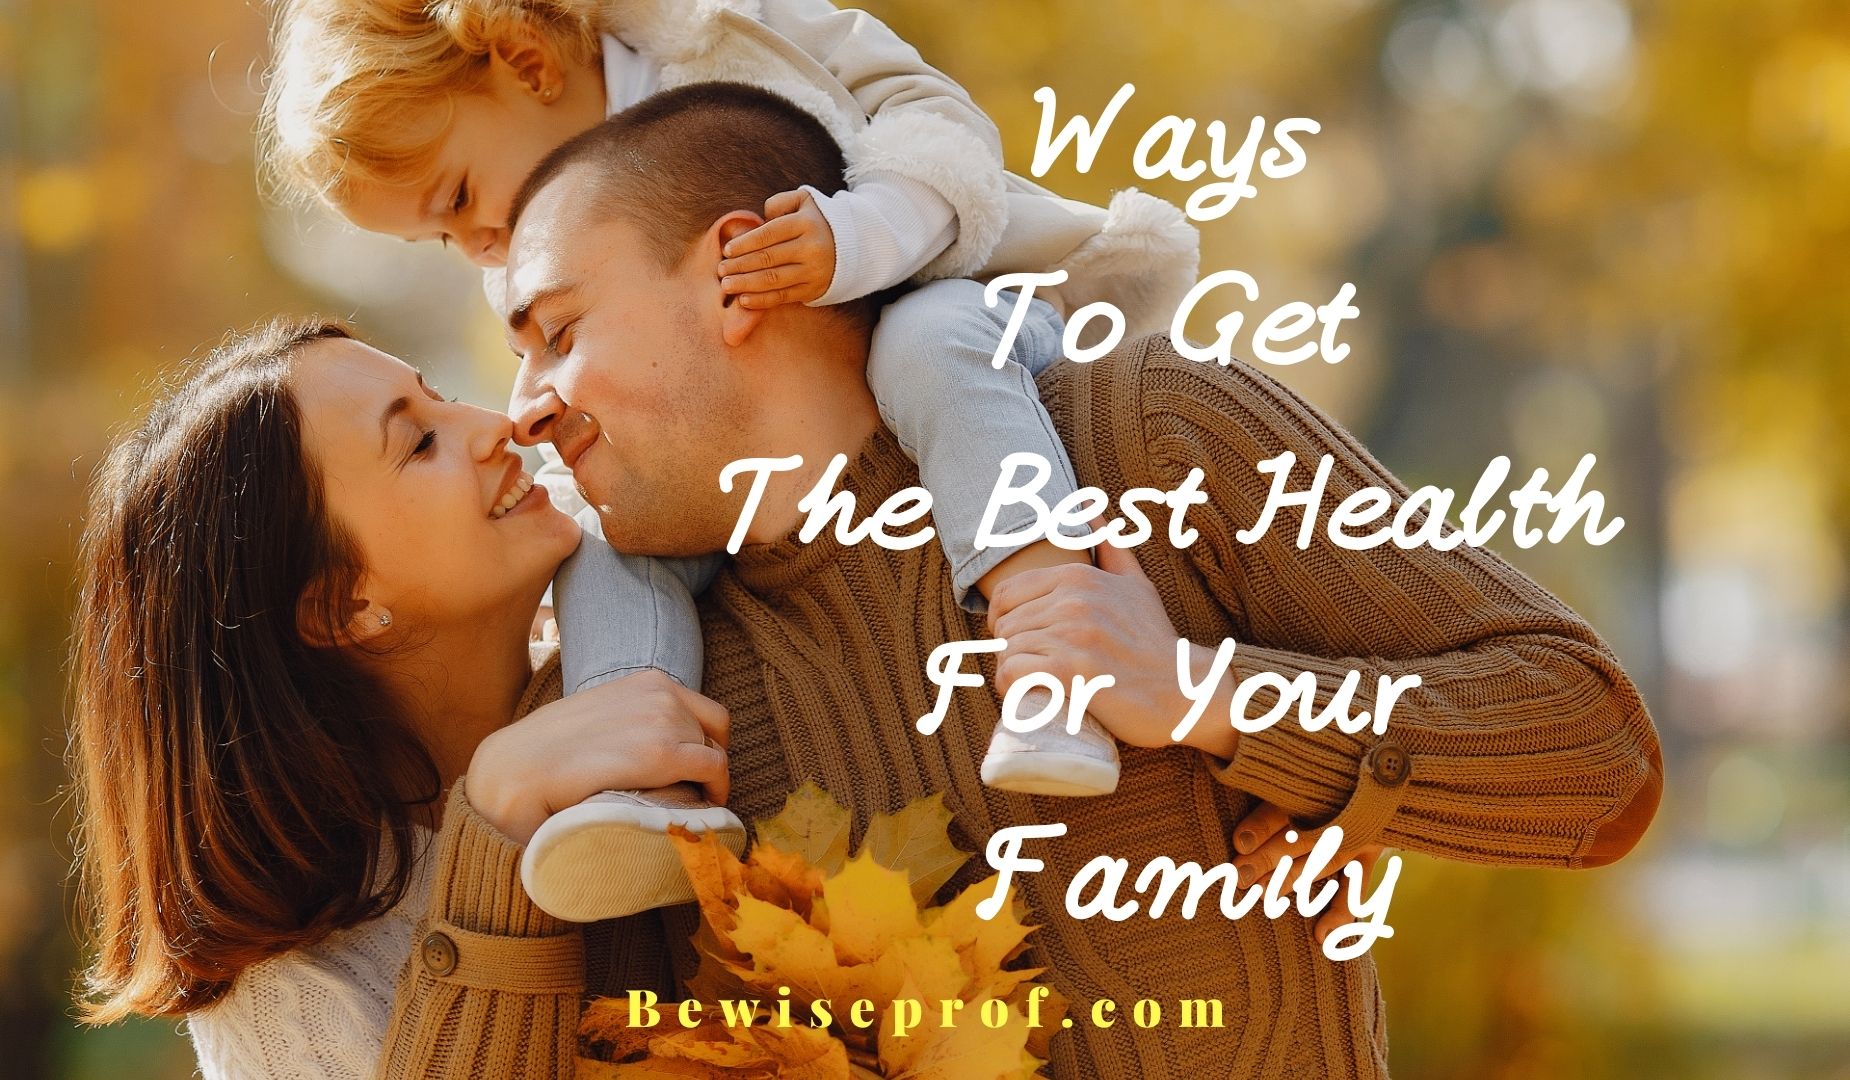 Ways To Get The Best Health For Your Family